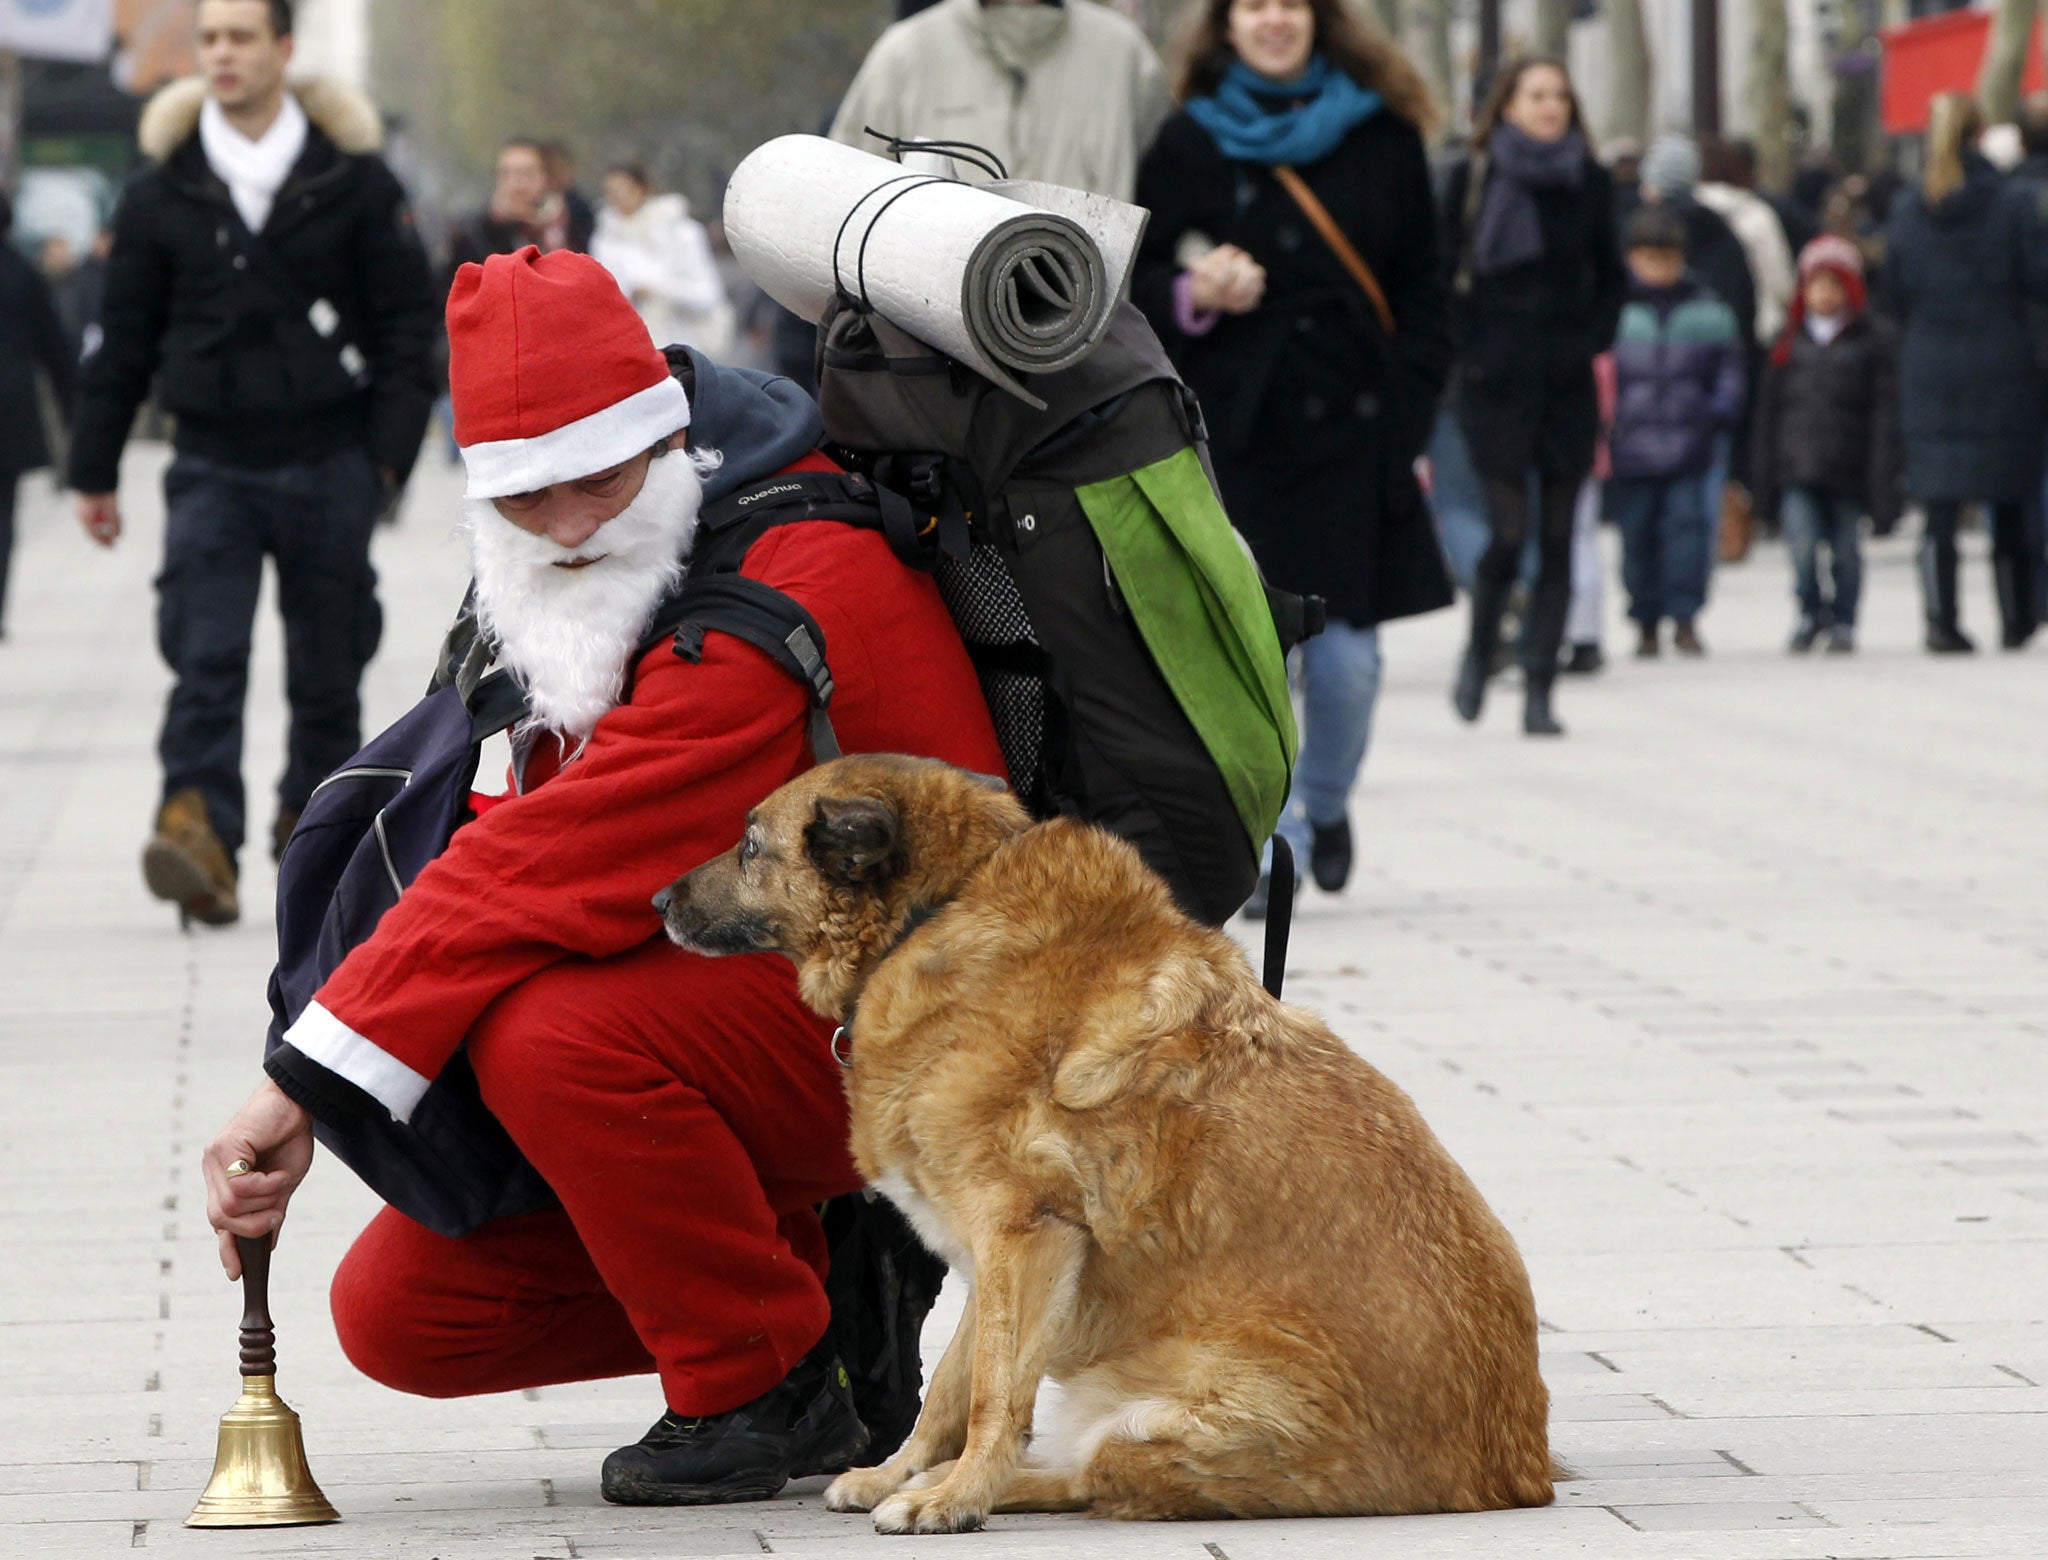 A homeless man dressed up as Santa Klaus looks at his dog in the Champs-Elysees in Paris